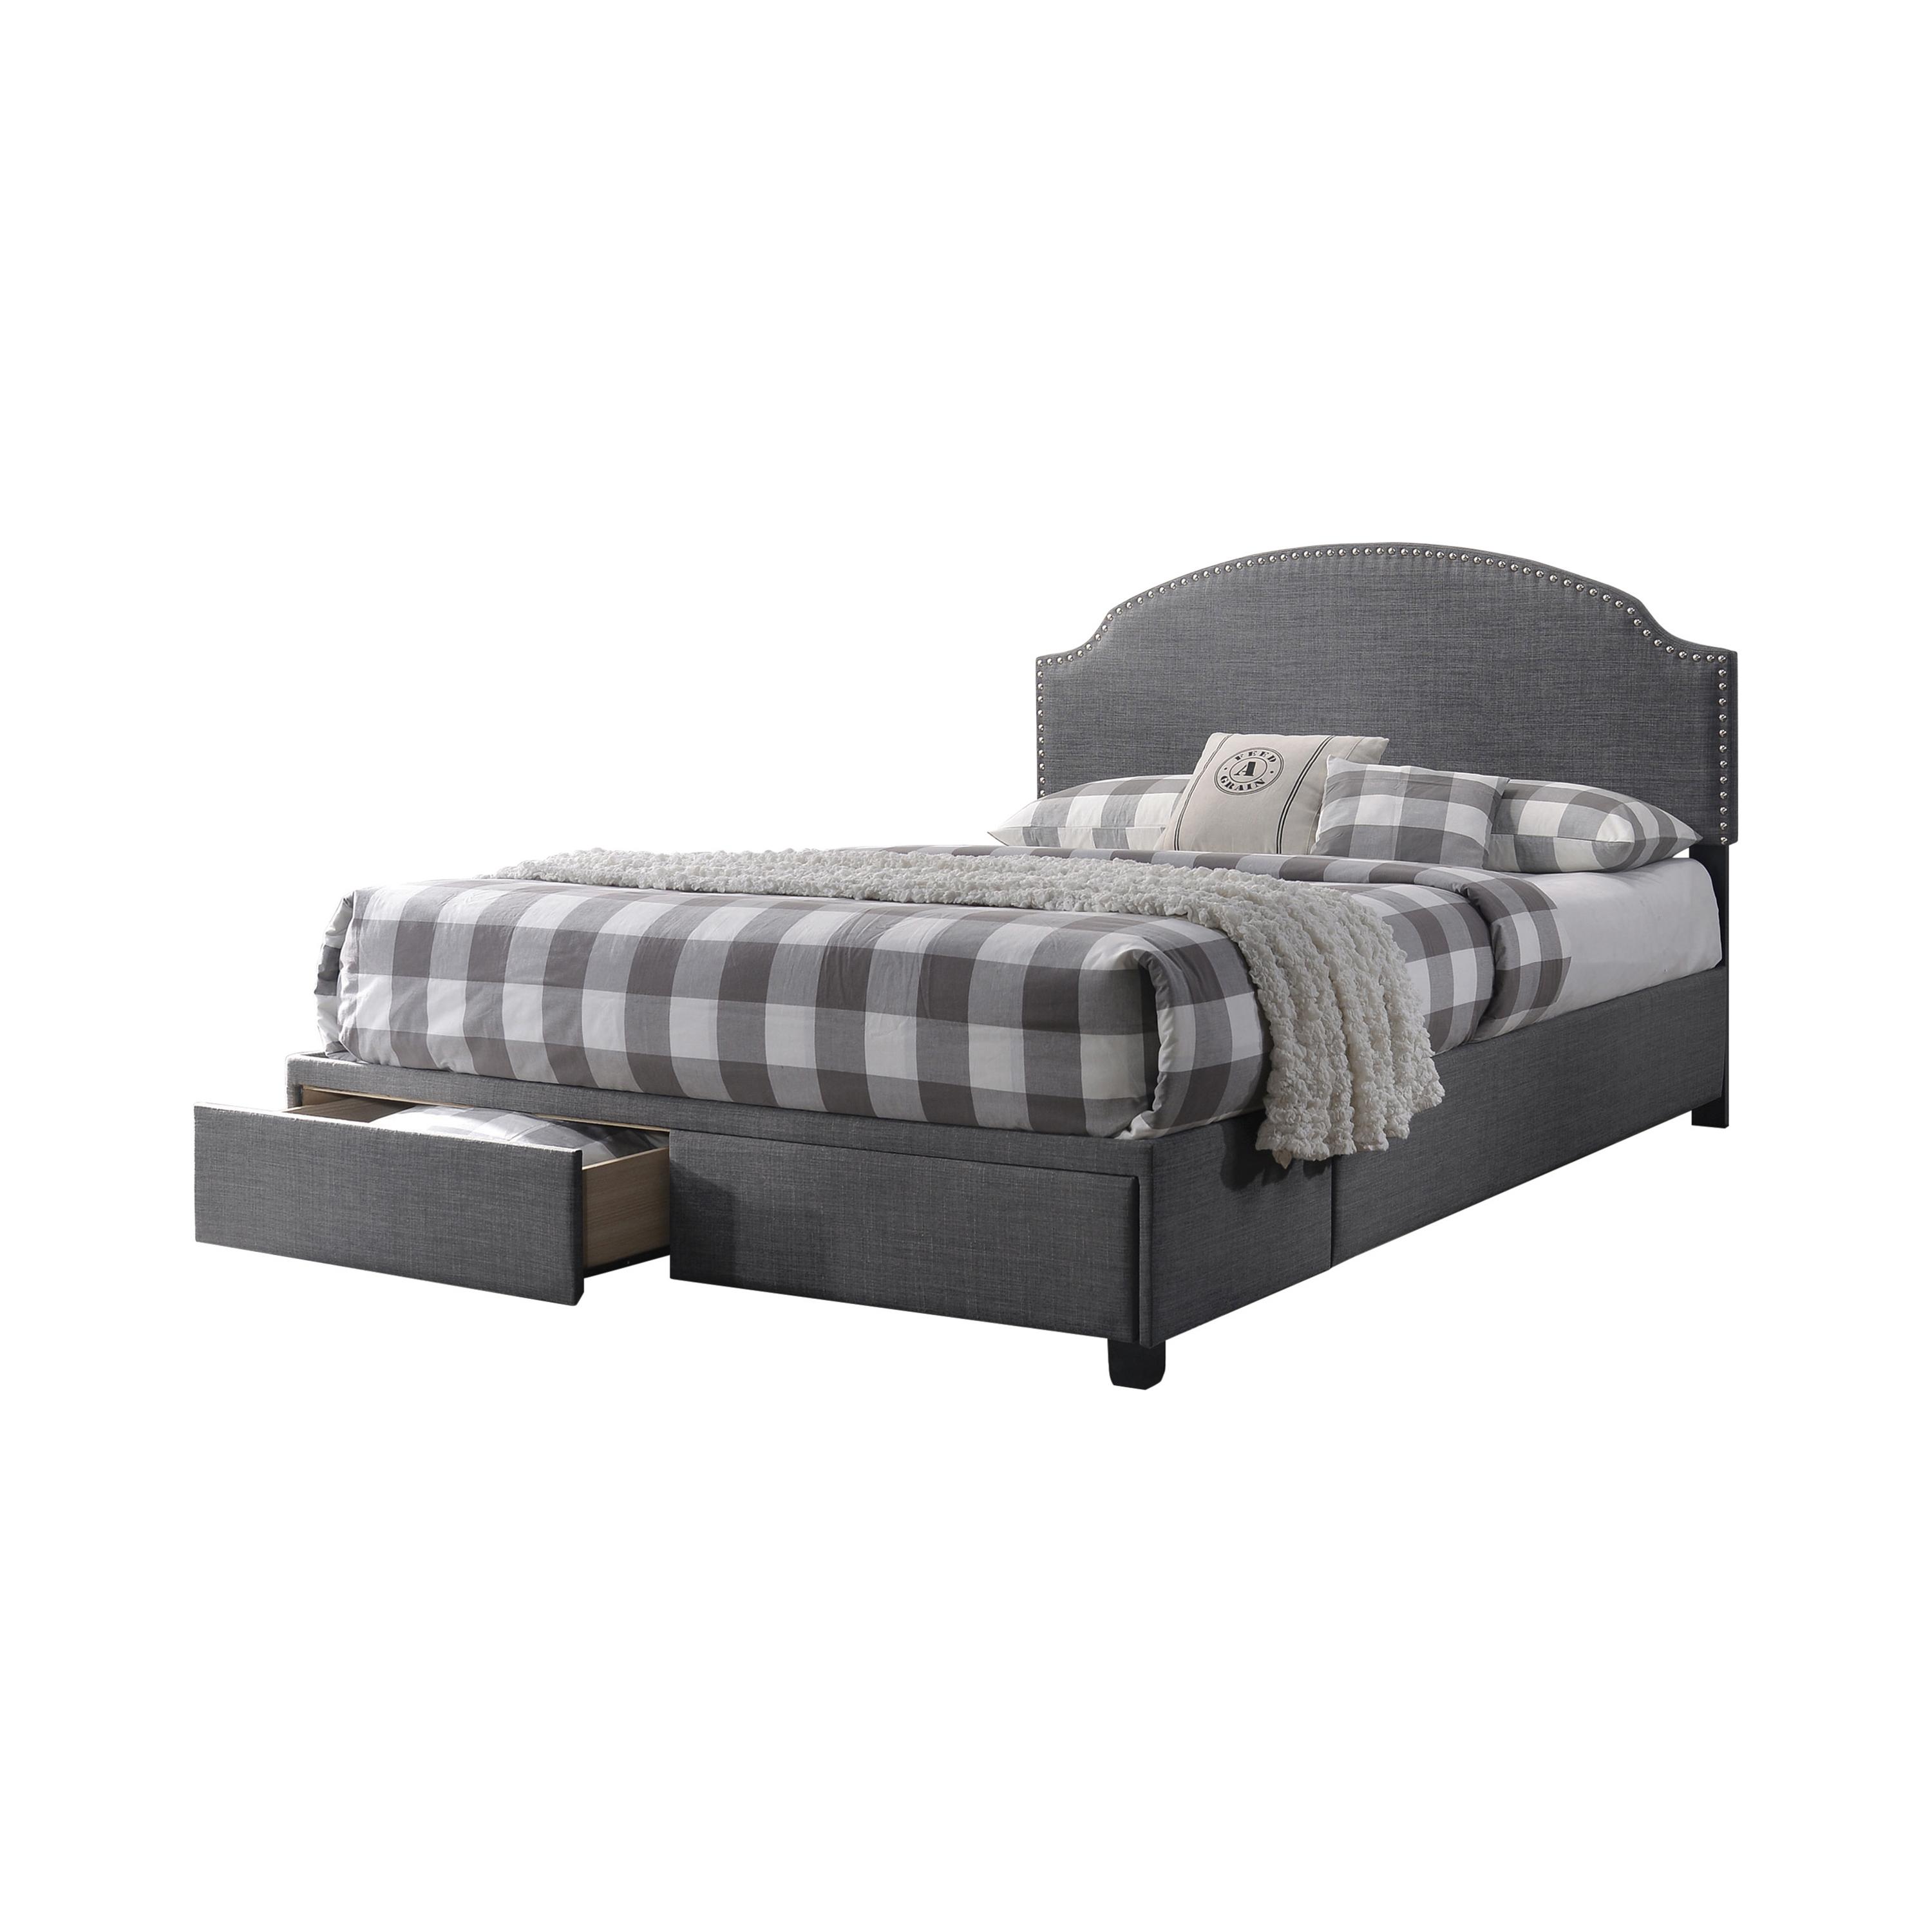 Modern Bed 305895F Niland 305895F in Charcoal Fabric